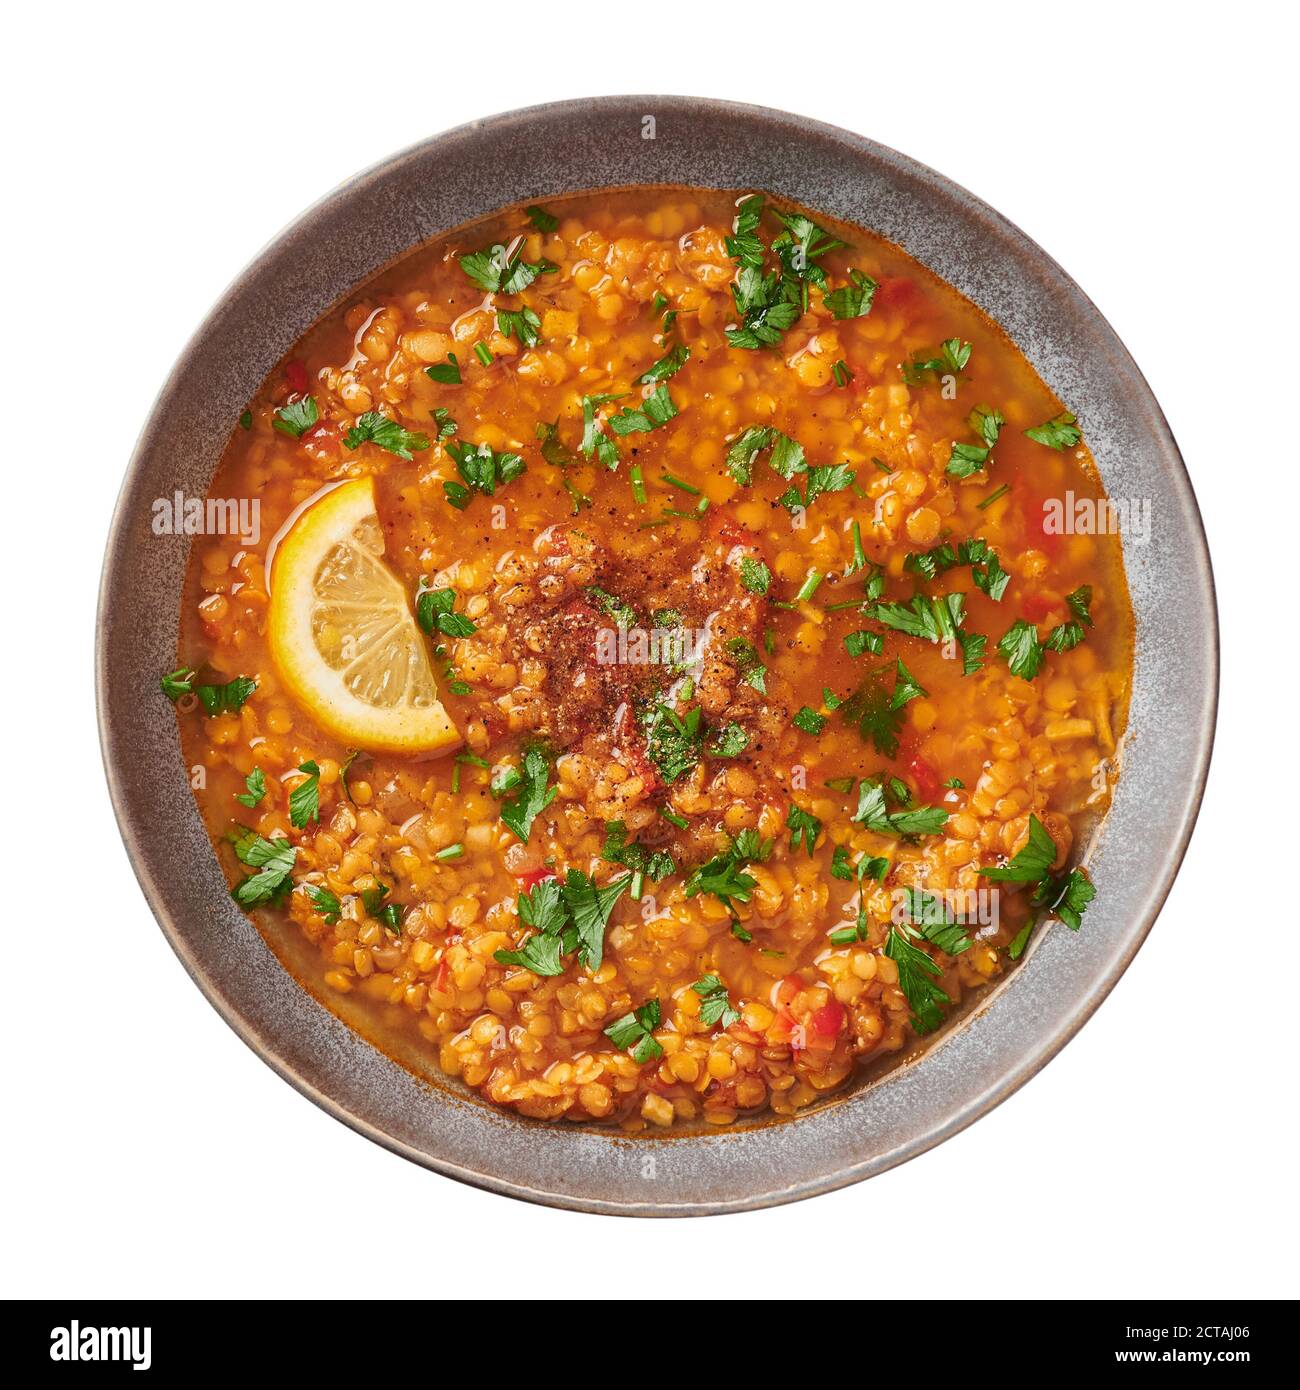 Red lentils tomato soup with parsley and lemon in gray plate isolated on white backdrop. Vegetarian dish. Stock Photo